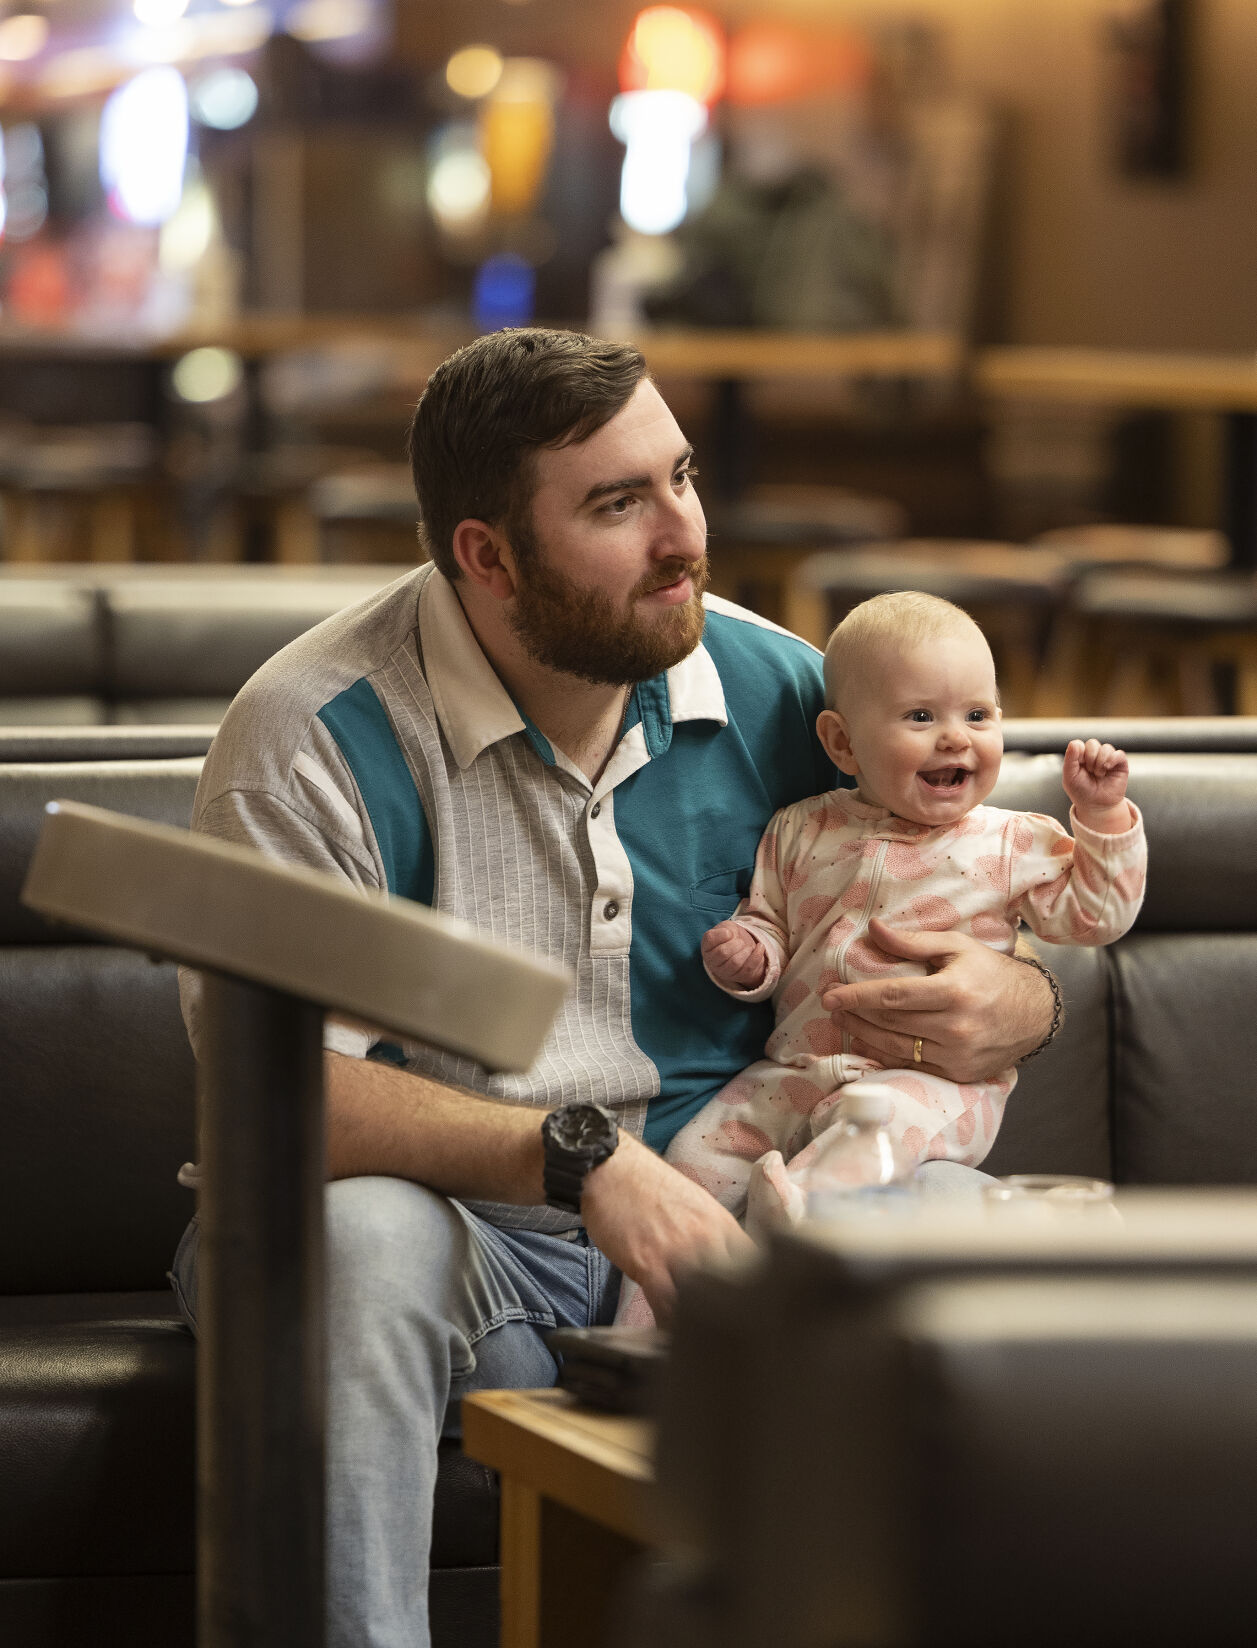 Jonny Carlson holds daughter Gianna, 7 months, during an evening of bowling at Fischer Lanes in Dubuque on Thursday, May 4, 2023.    PHOTO CREDIT: Stephen Gassman
Telegraph Herald